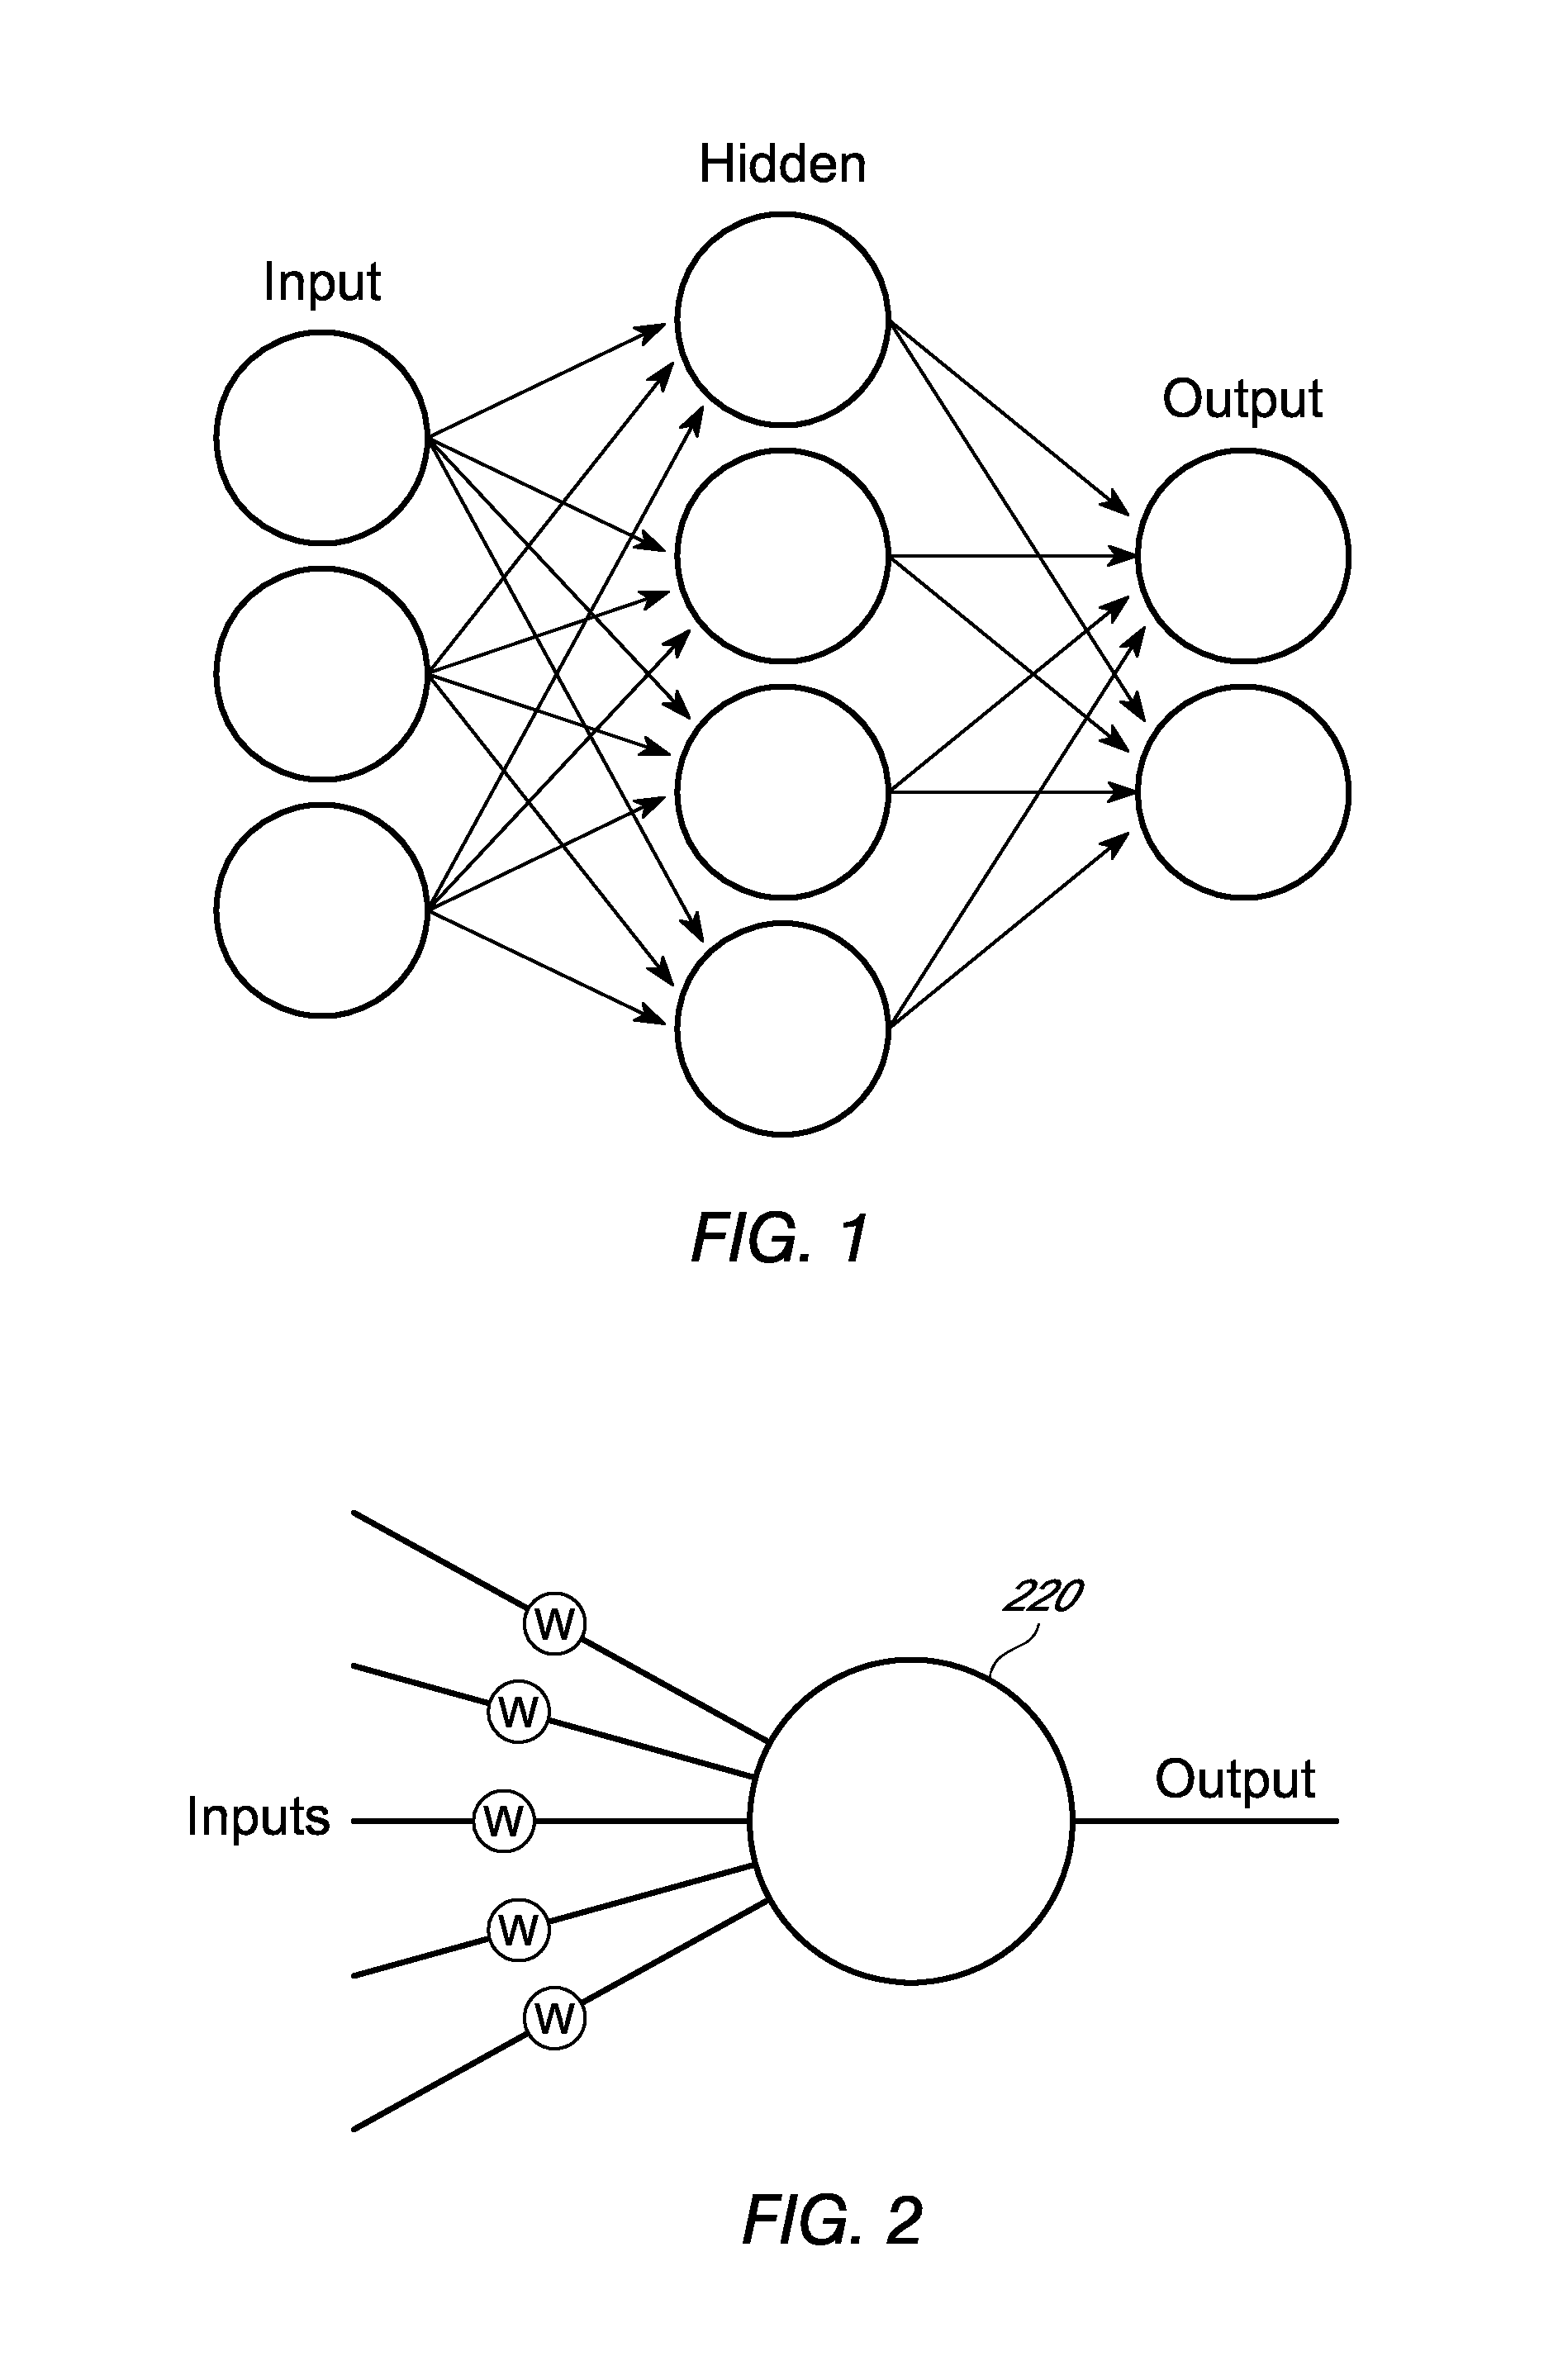 Neural network frequency control